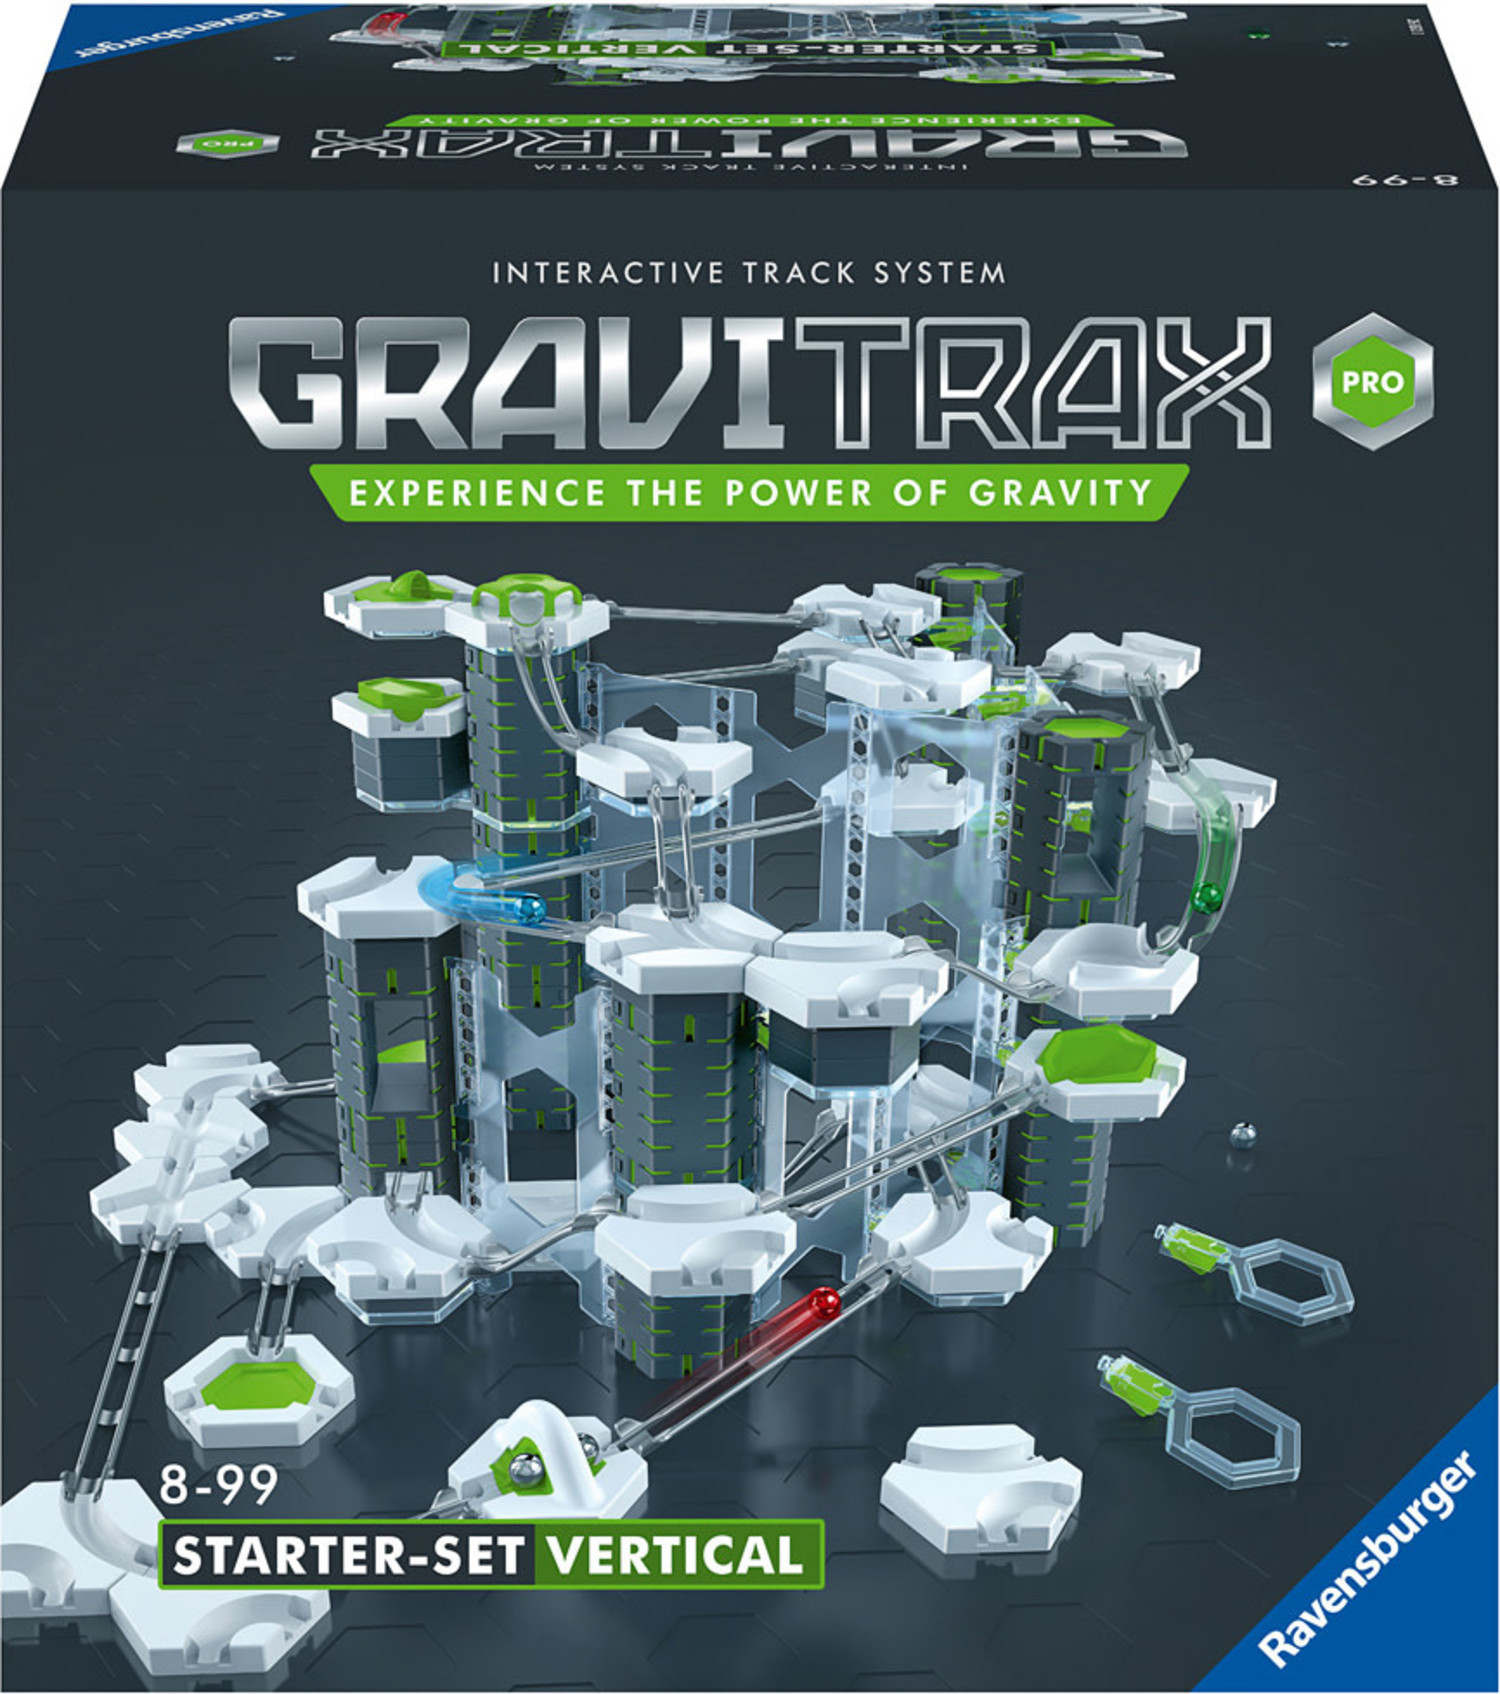 GraviTrax - Interactive track system from Ravensburger